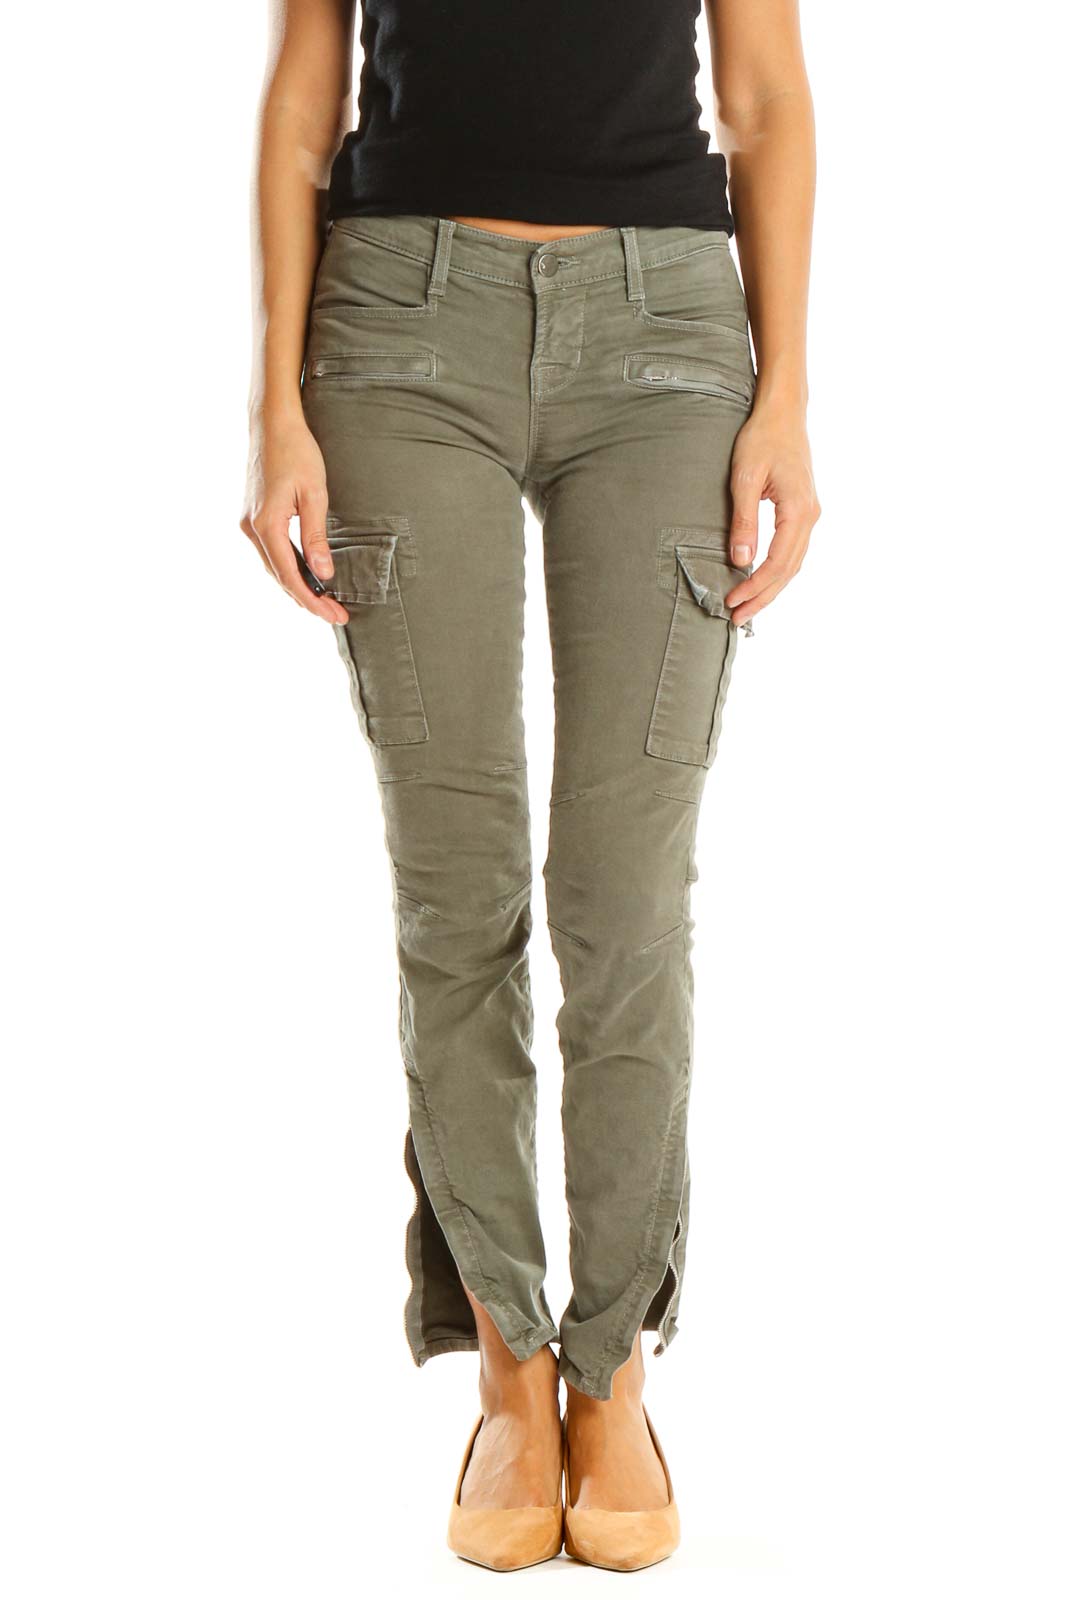 Green Cargo Skinny Jeans Front